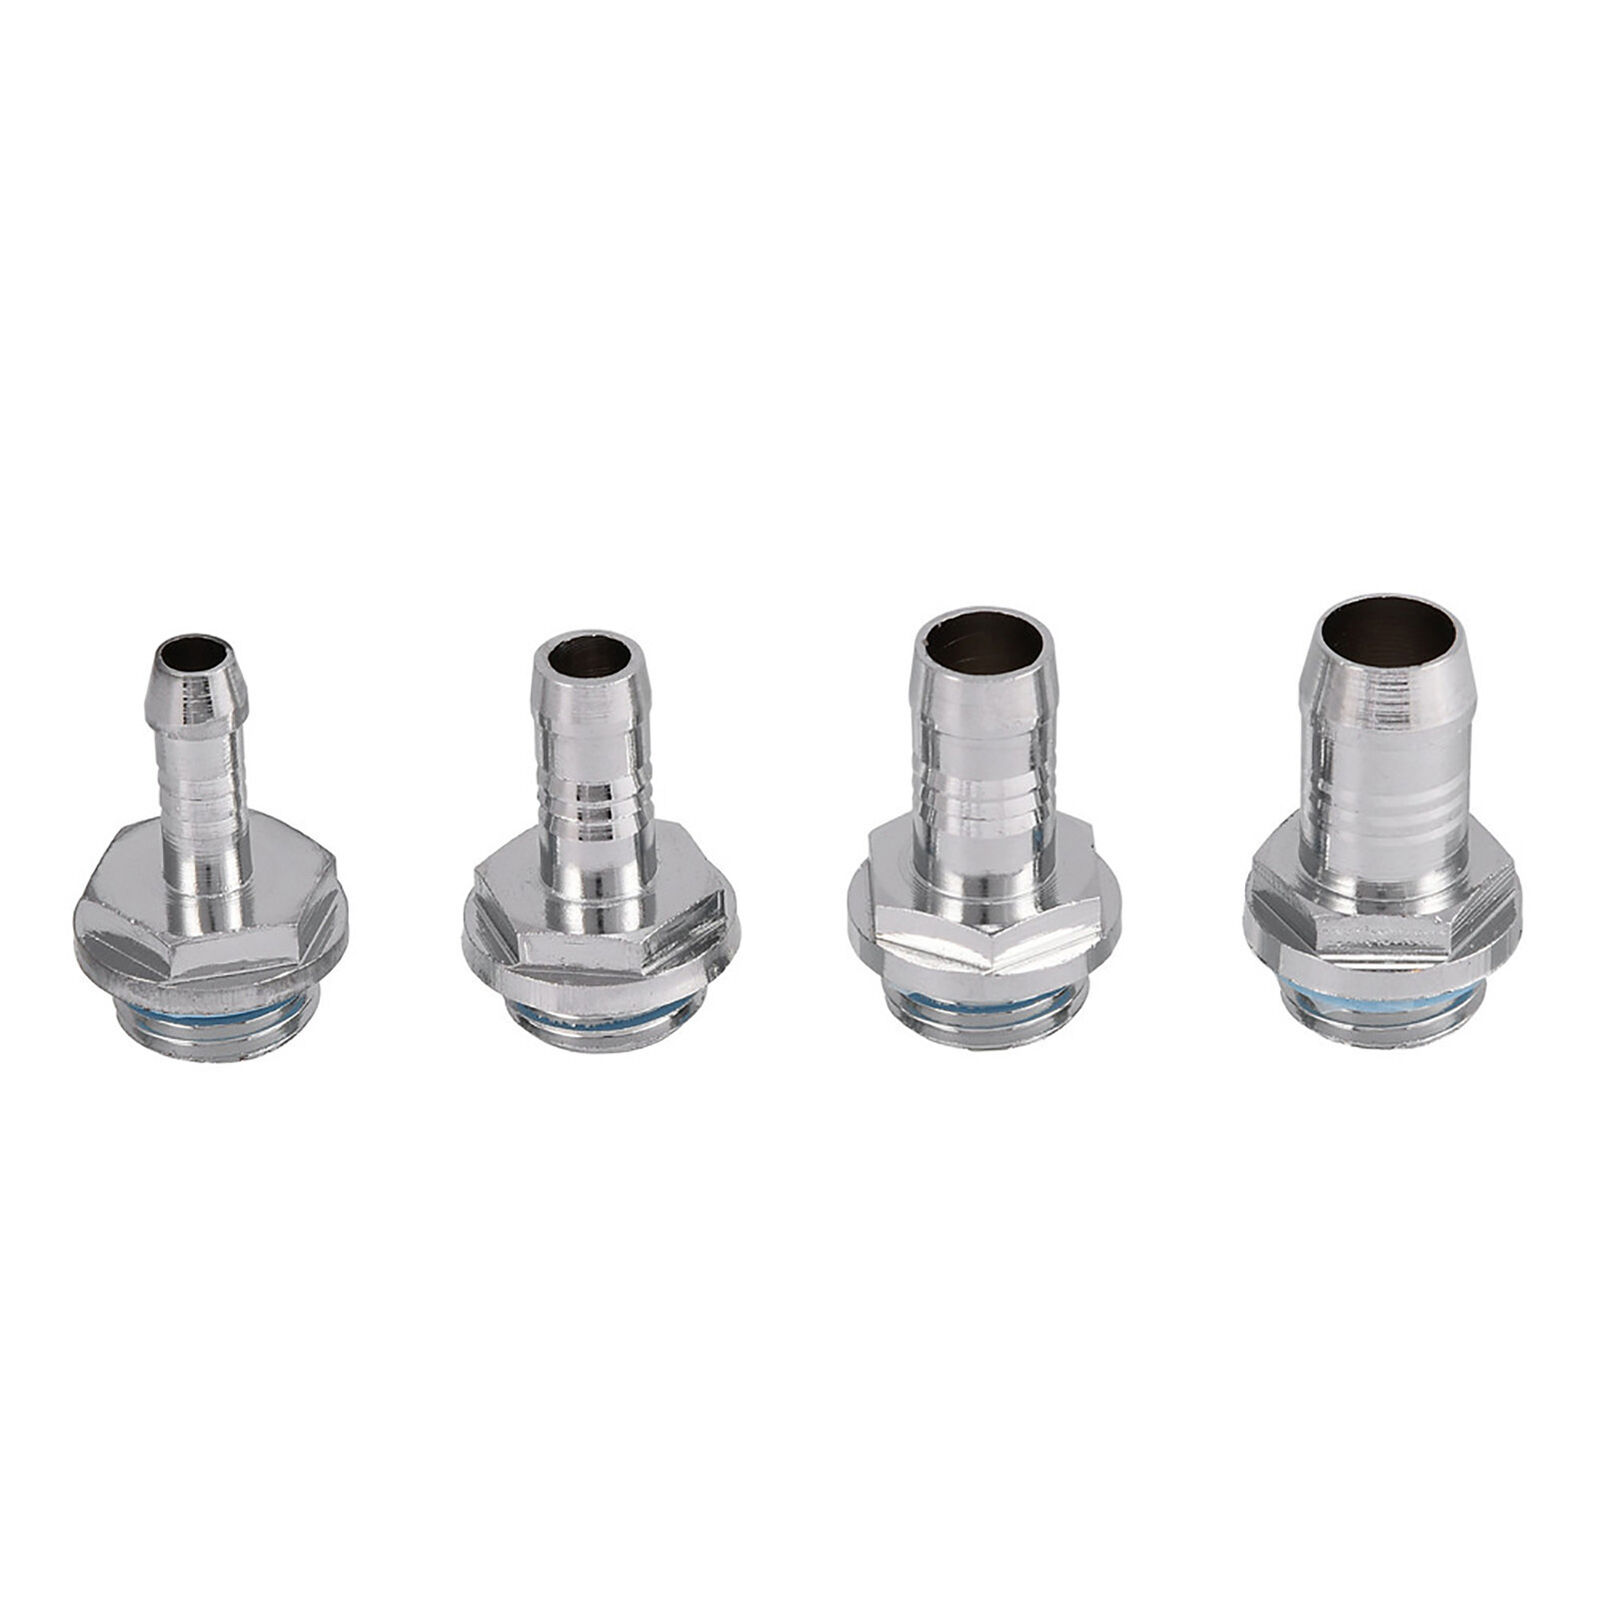 6 PCS PC Water Cooling Two touch Fitting G1/4 Thread Barb Connector for Tube